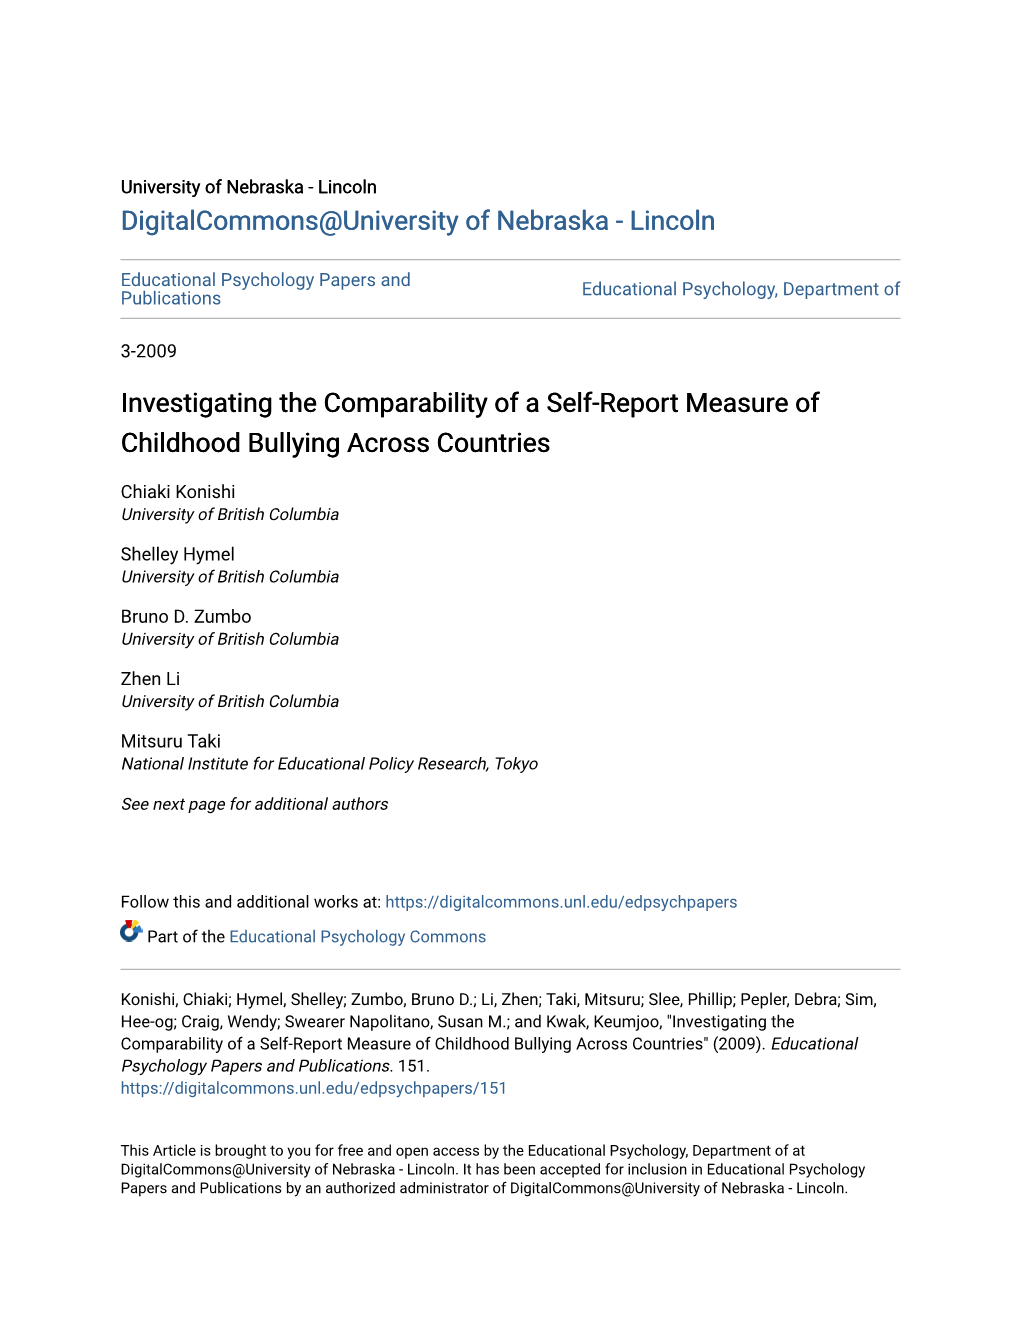 Investigating the Comparability of a Self-Report Measure of Childhood Bullying Across Countries